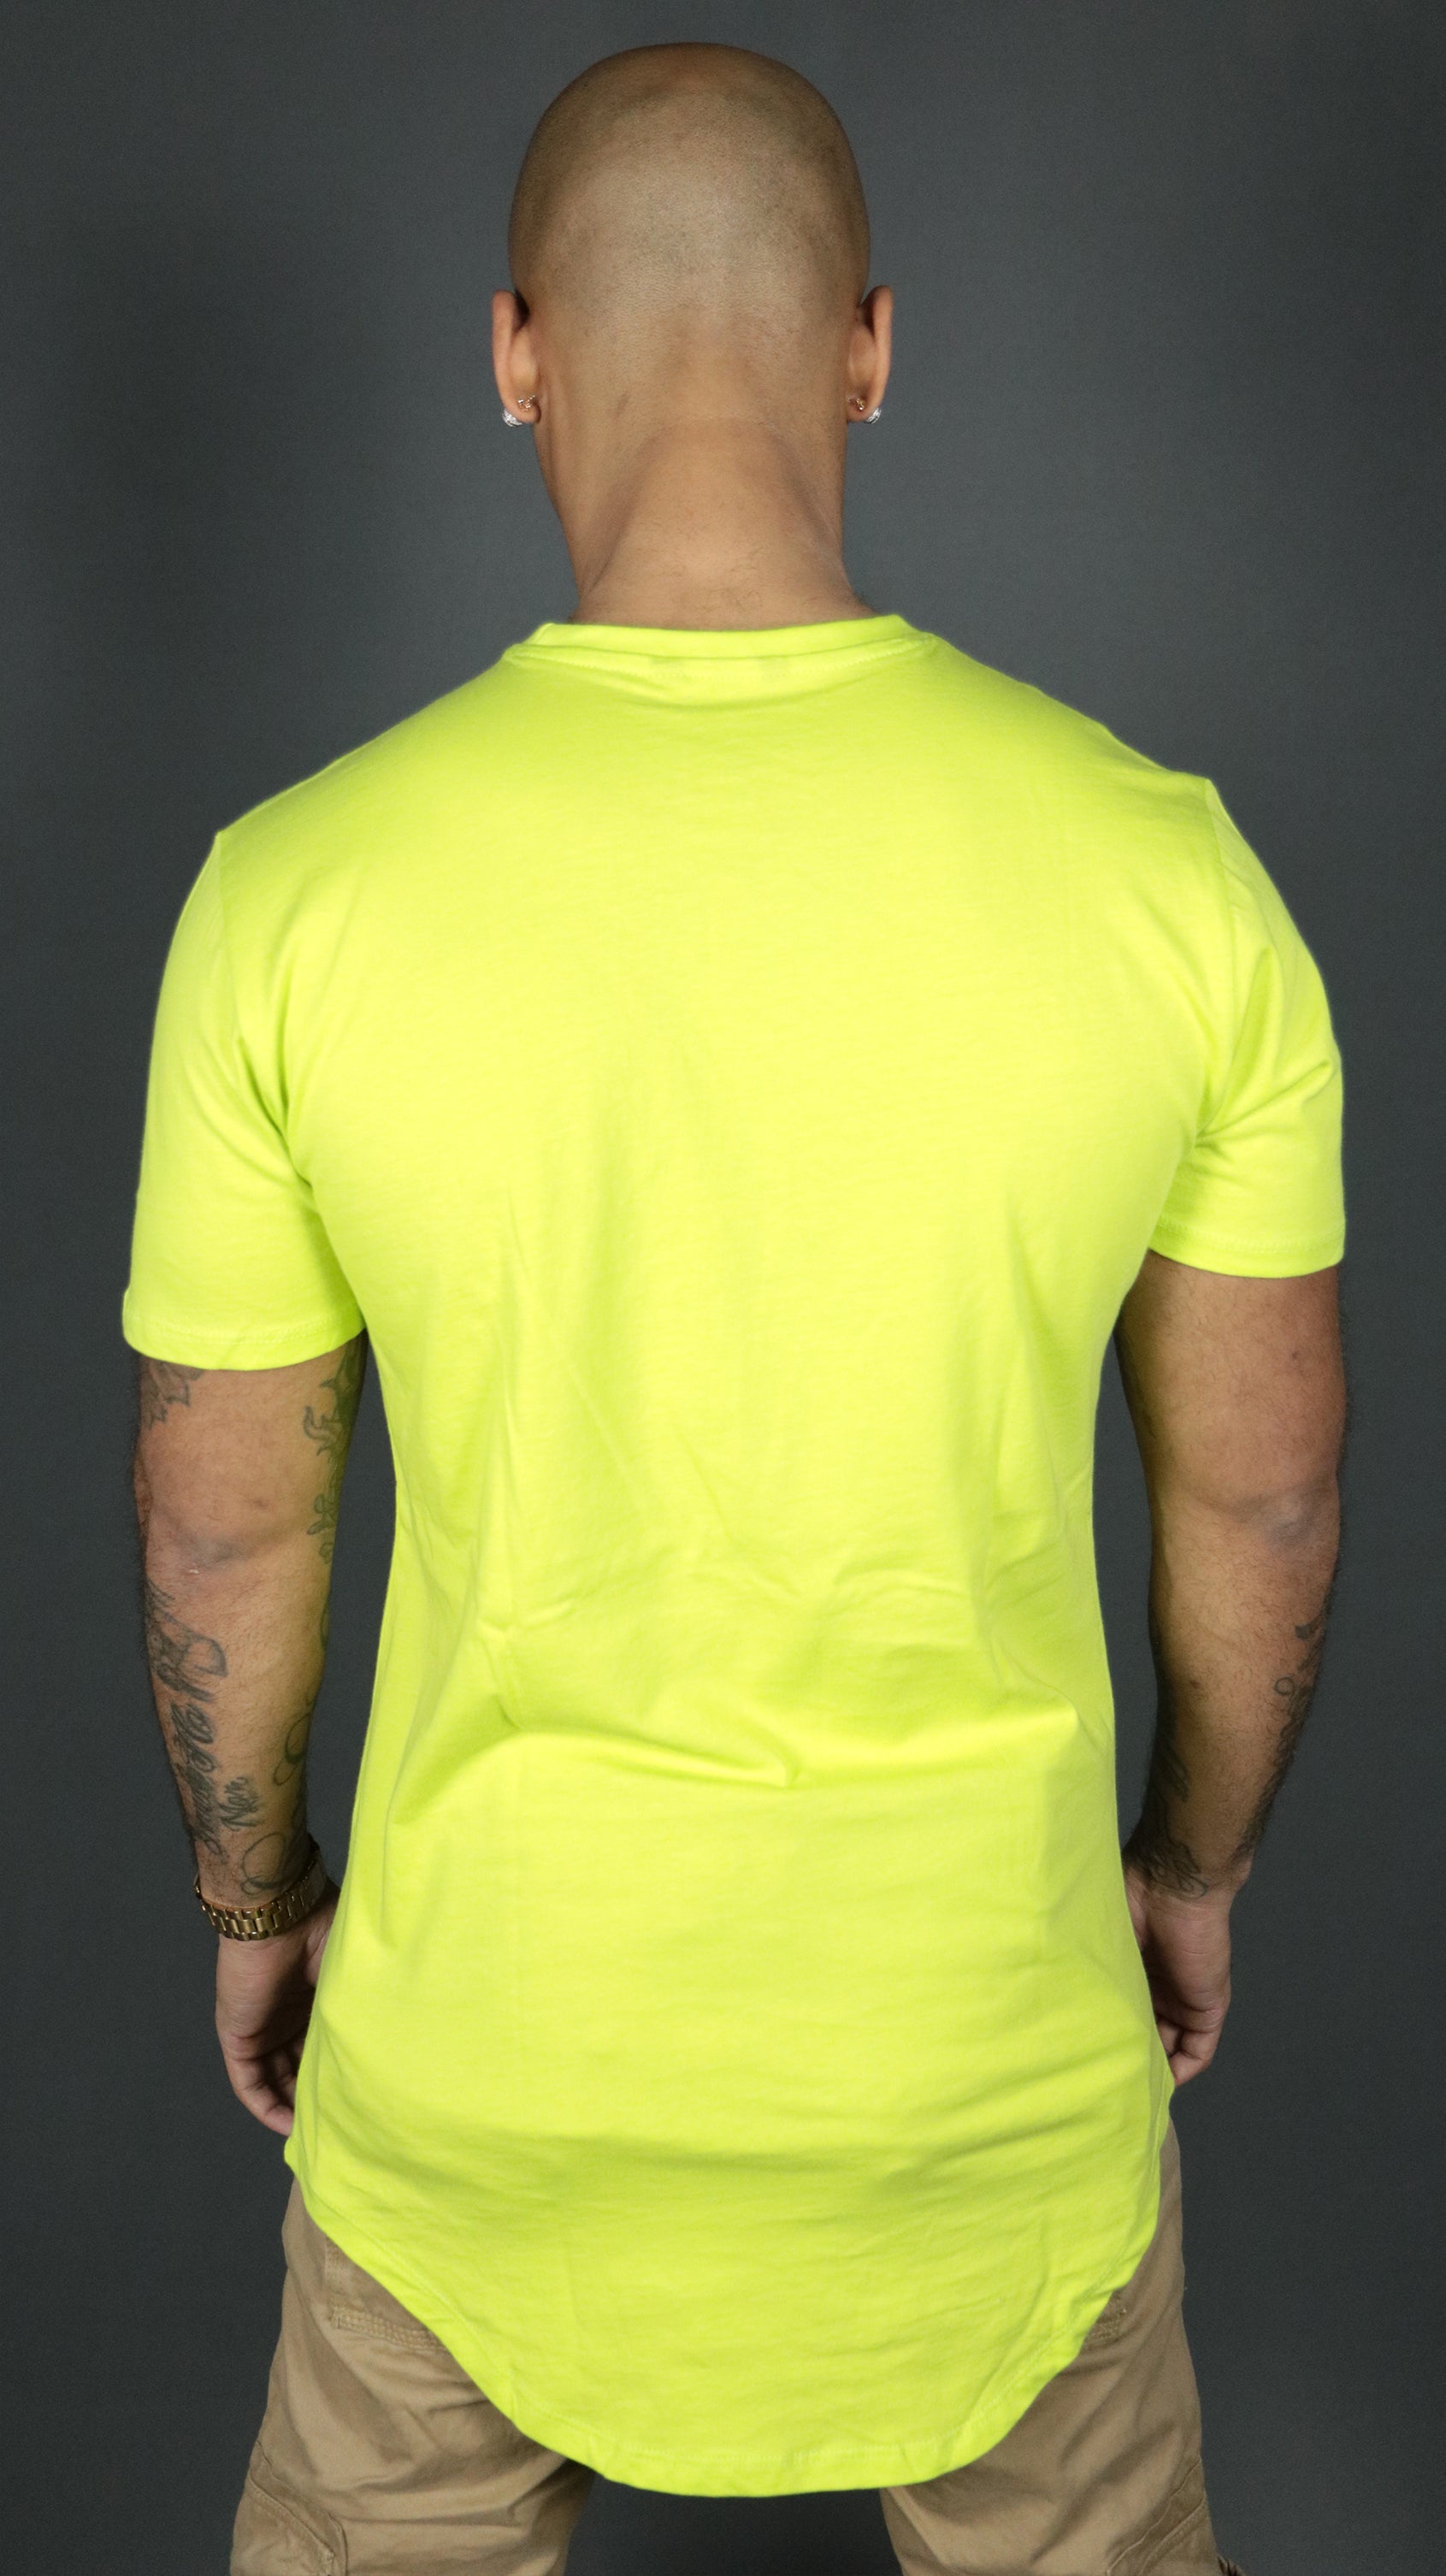 The scoop bottom of the Jordan Craig yellow longline tshirt for men as seen from the back.